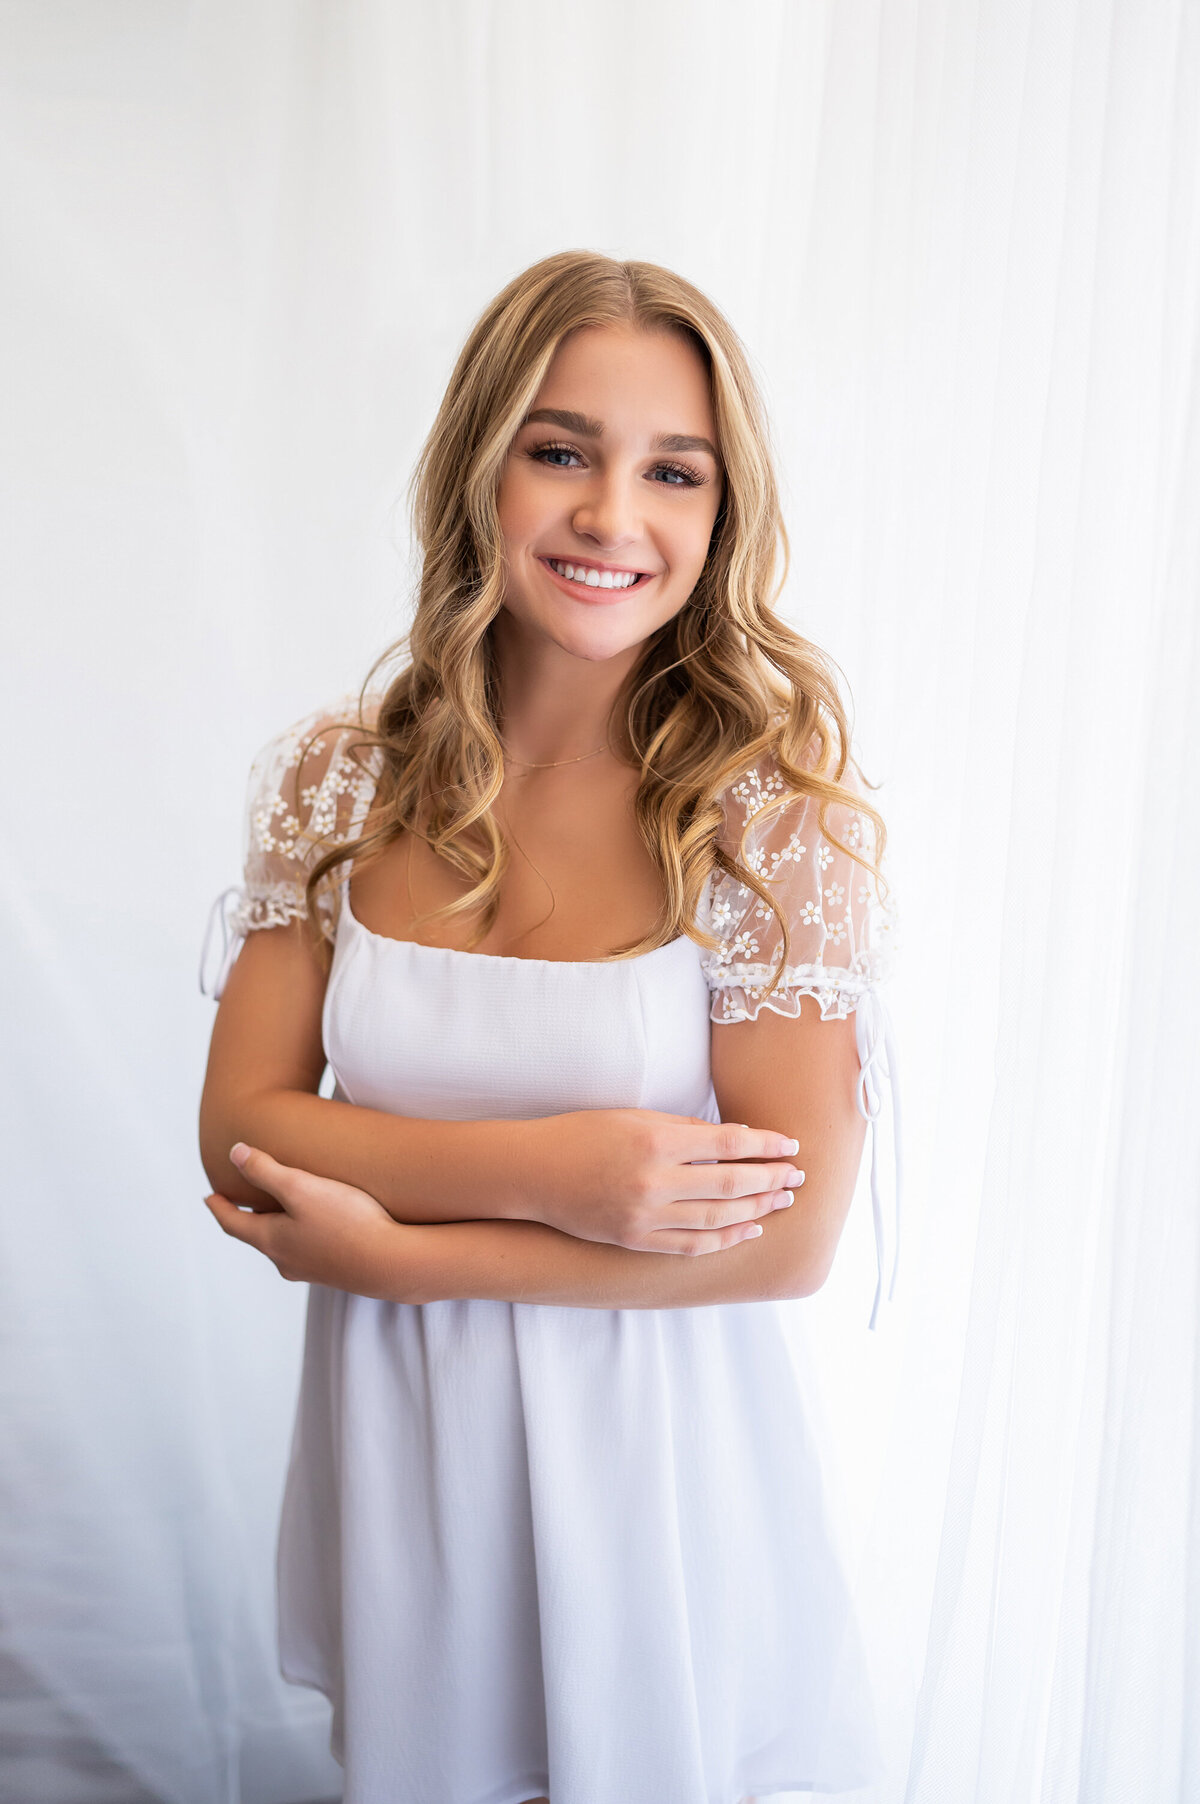 A student from Arrowhead High School poses for her senior pictures in our Downtown Waukesha photo studio wearing all white.